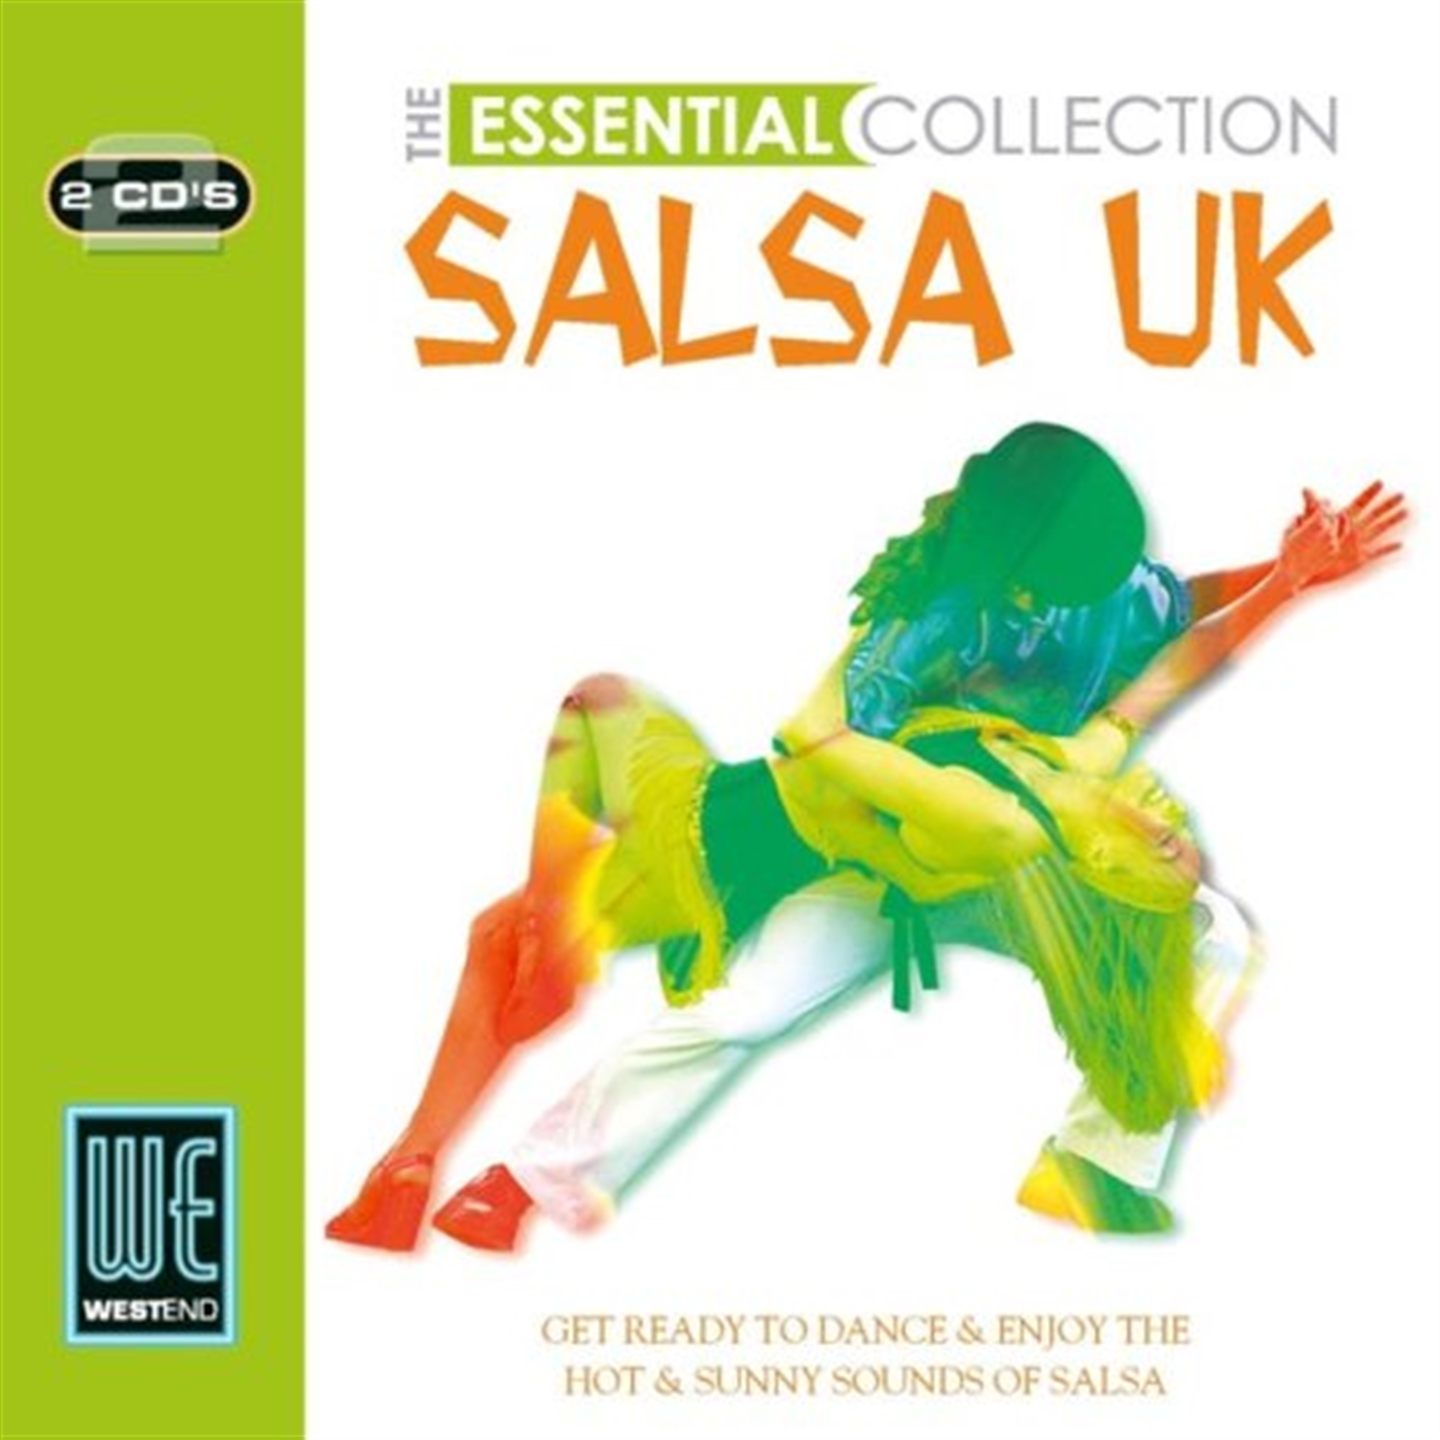 ESSENTIAL COLLECTION - SALSA UK